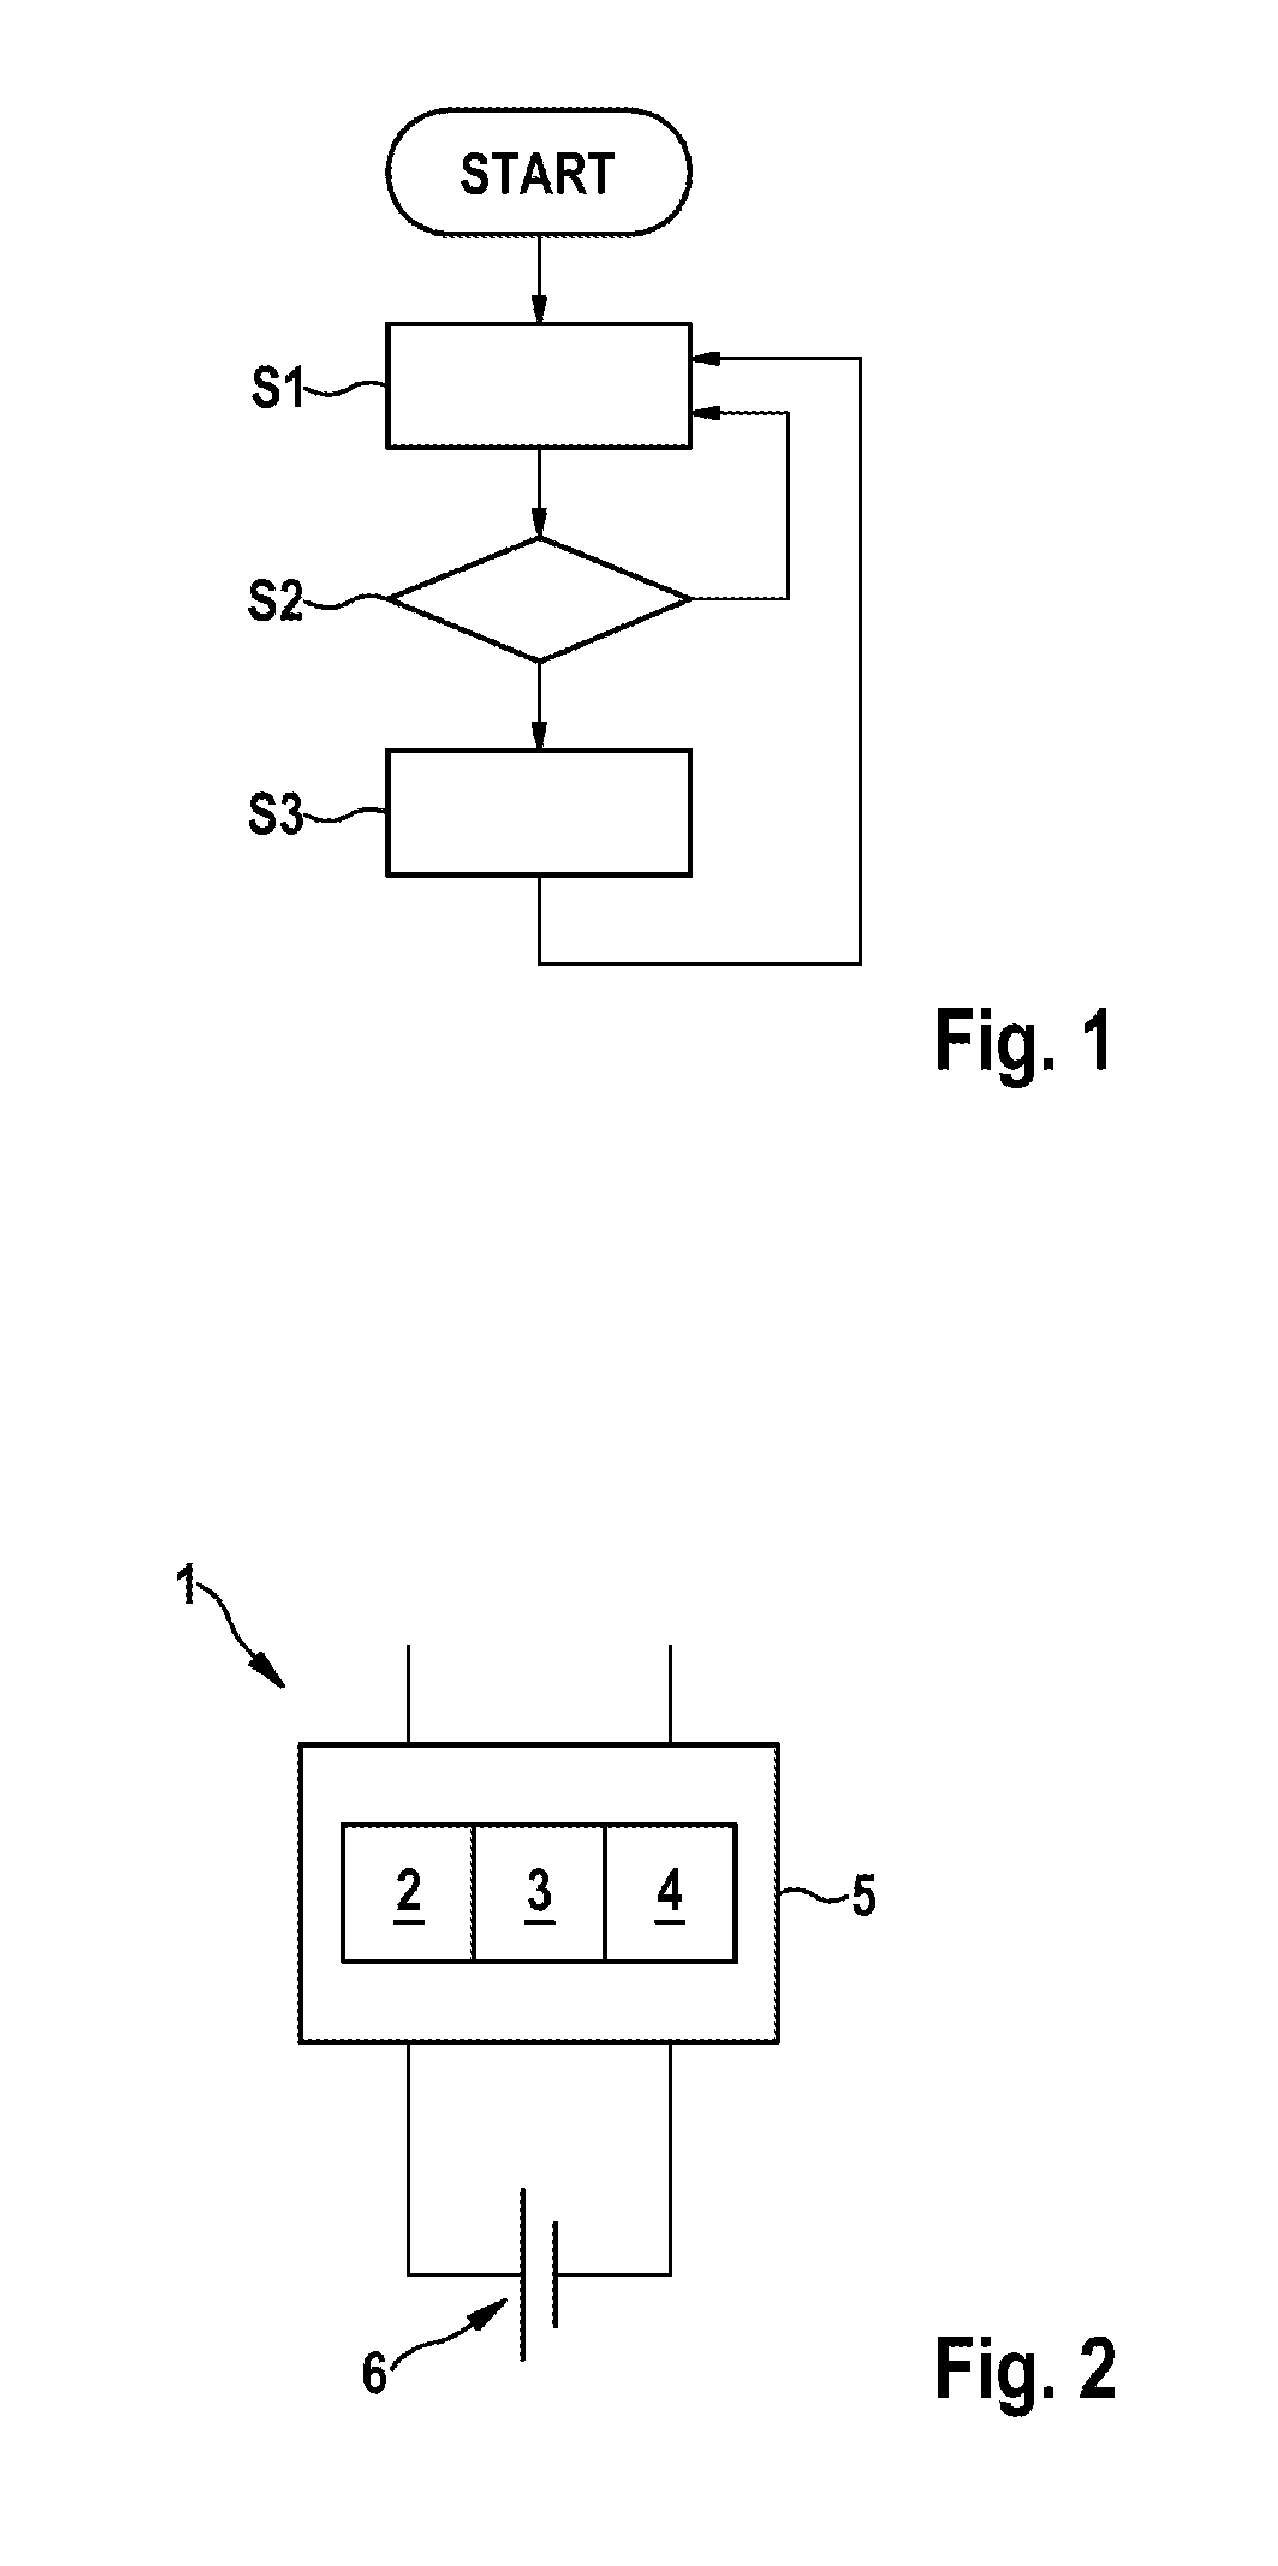 Method for minimizing cell aging of a battery and/or battery comprising an apparatus for minimizing cell aging of the battery